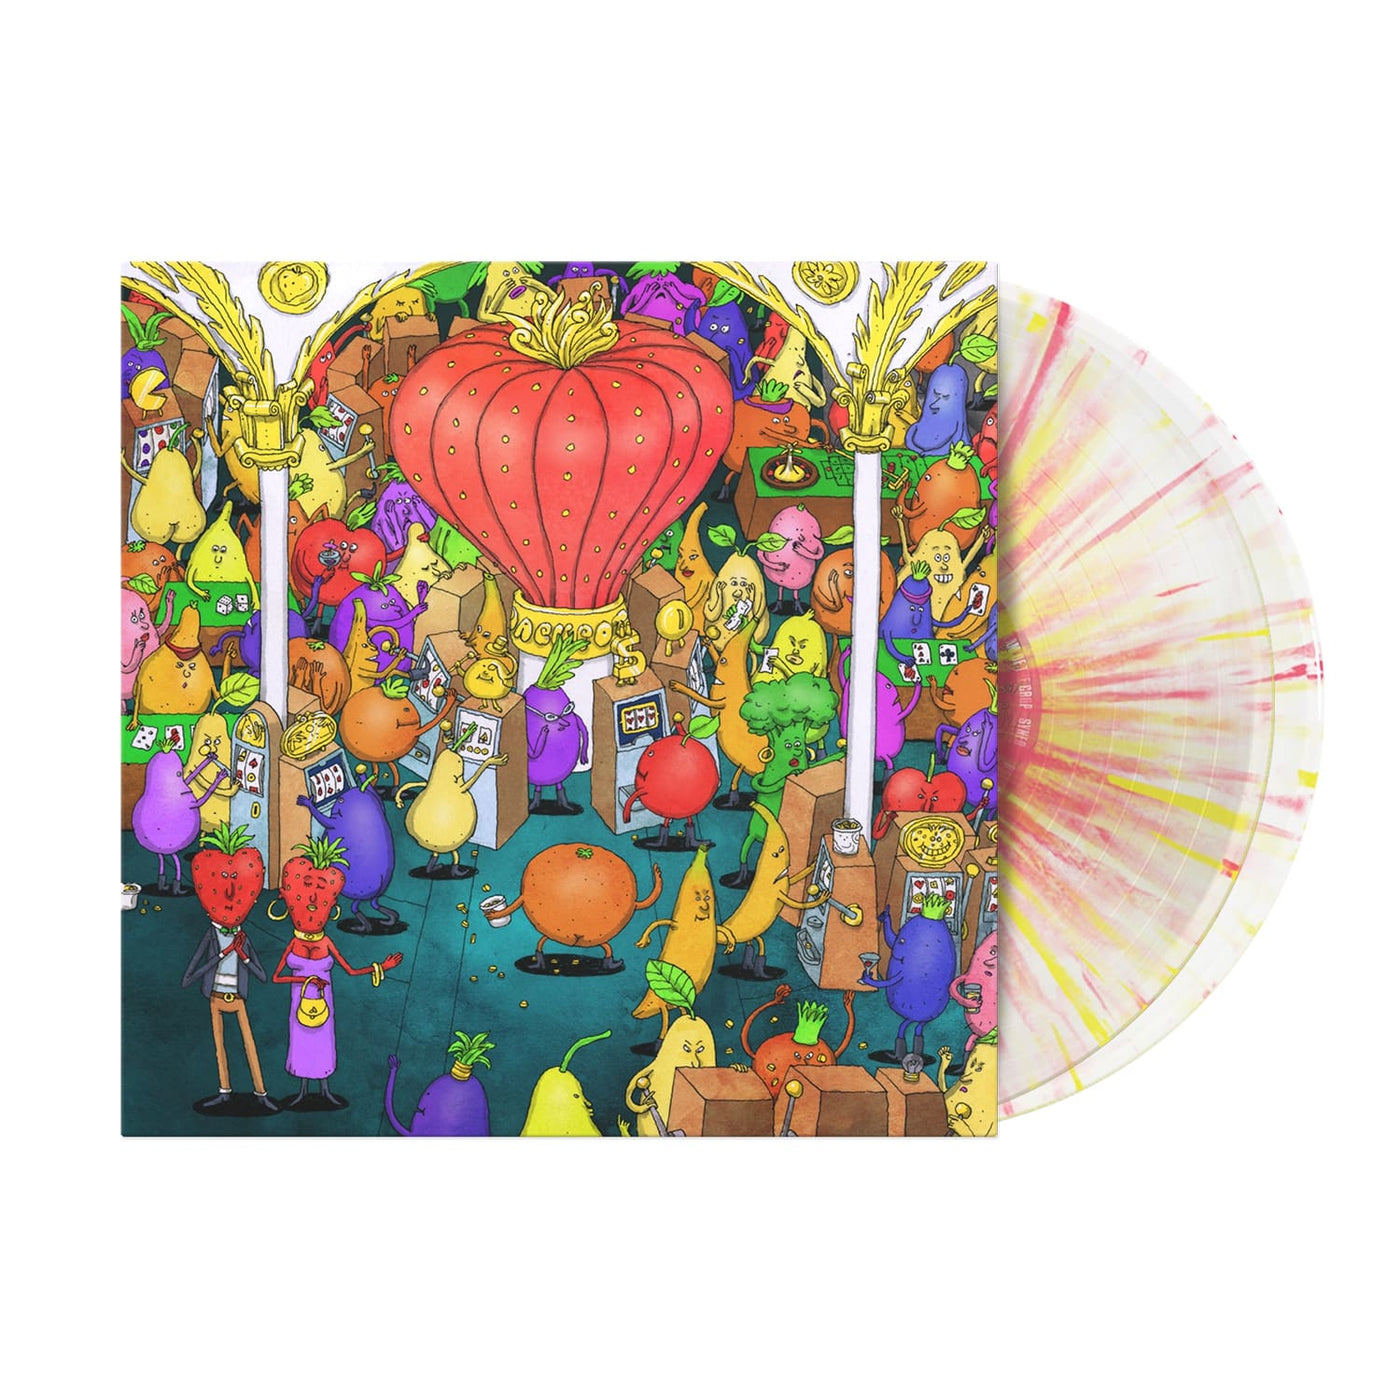 Image of Dance Gavin Dance Jackpot Juicer album cover with the vinyl exposed to show its coloring on a white background. Album Cover shows various fruit and vegetable characters playing slot machines and partying. Vinyl color is clear with yellow and pink splatter. 